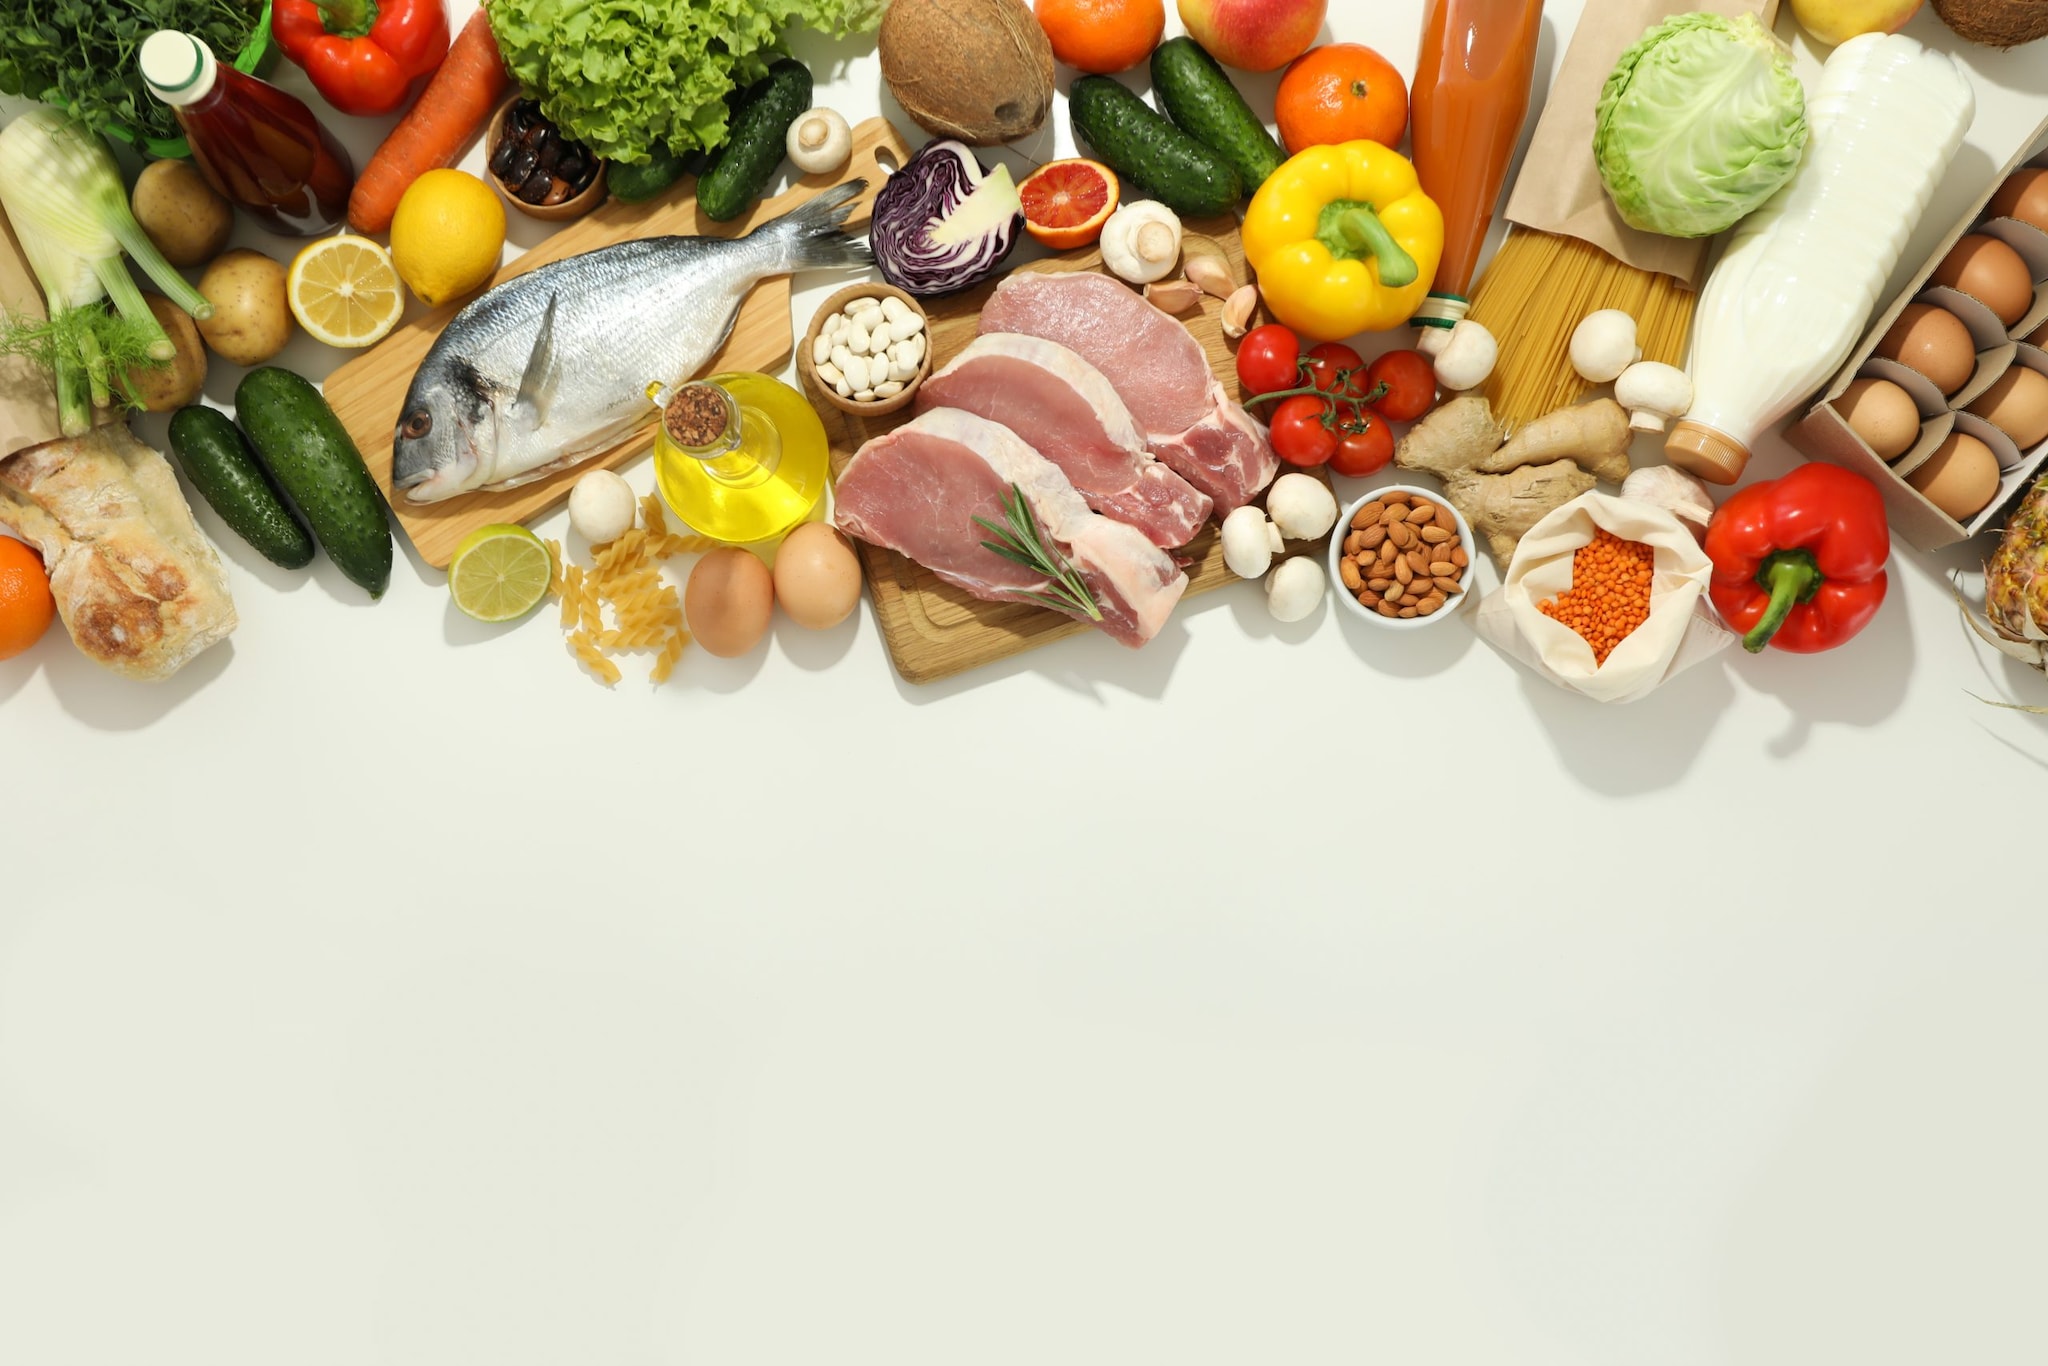 Images shows a spread of several types of foods like fruits, vegetables, fish, eggs, meats, nuts, milk, and bread.